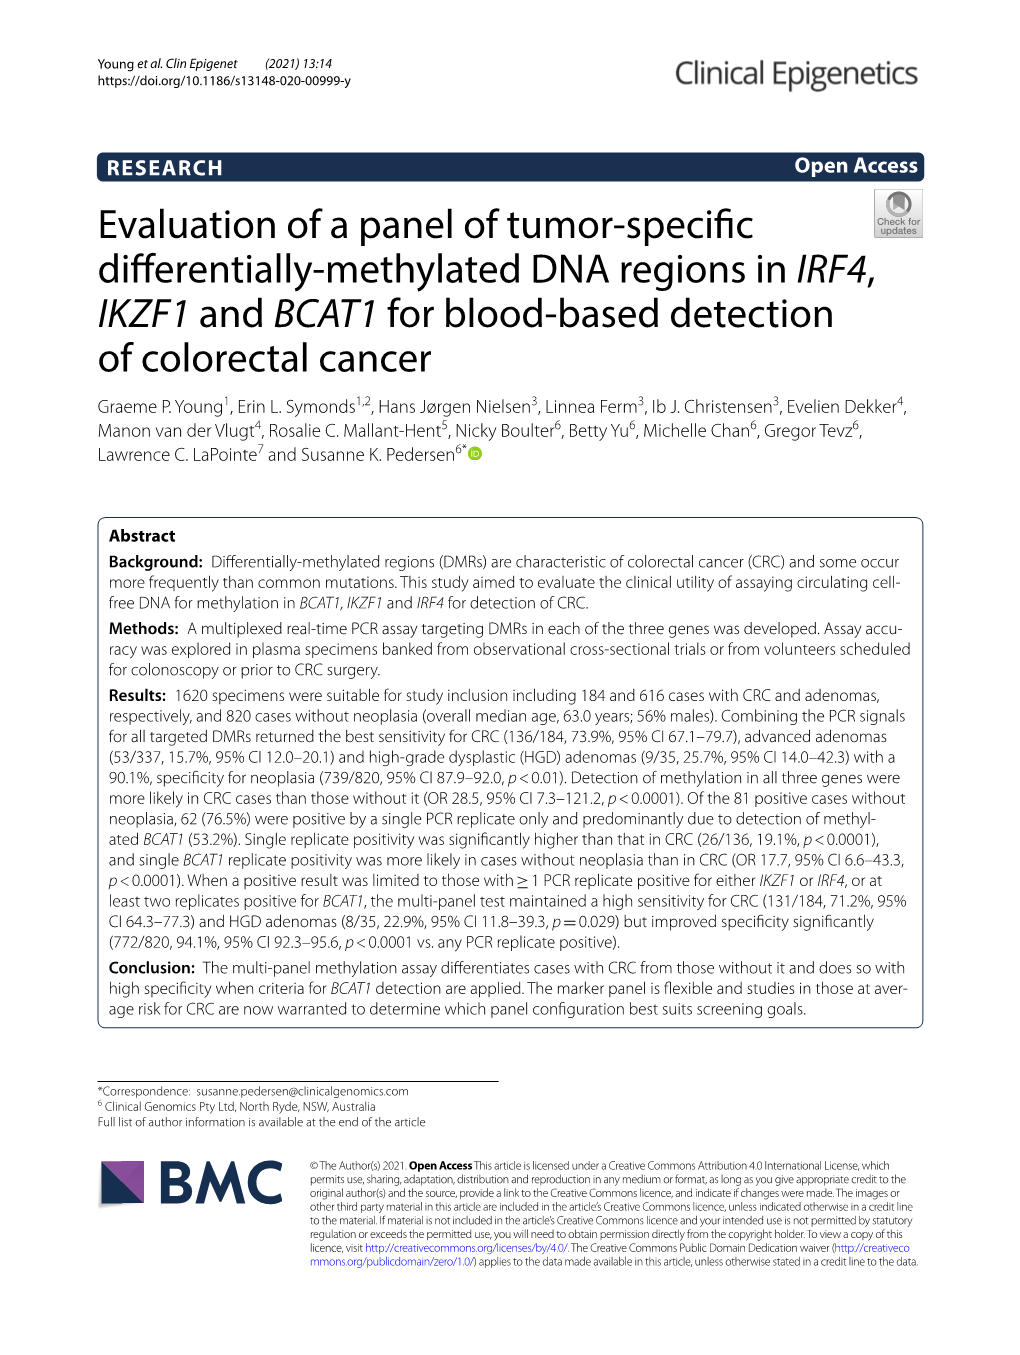 Evaluation of a Panel of Tumor-Specific Differentially